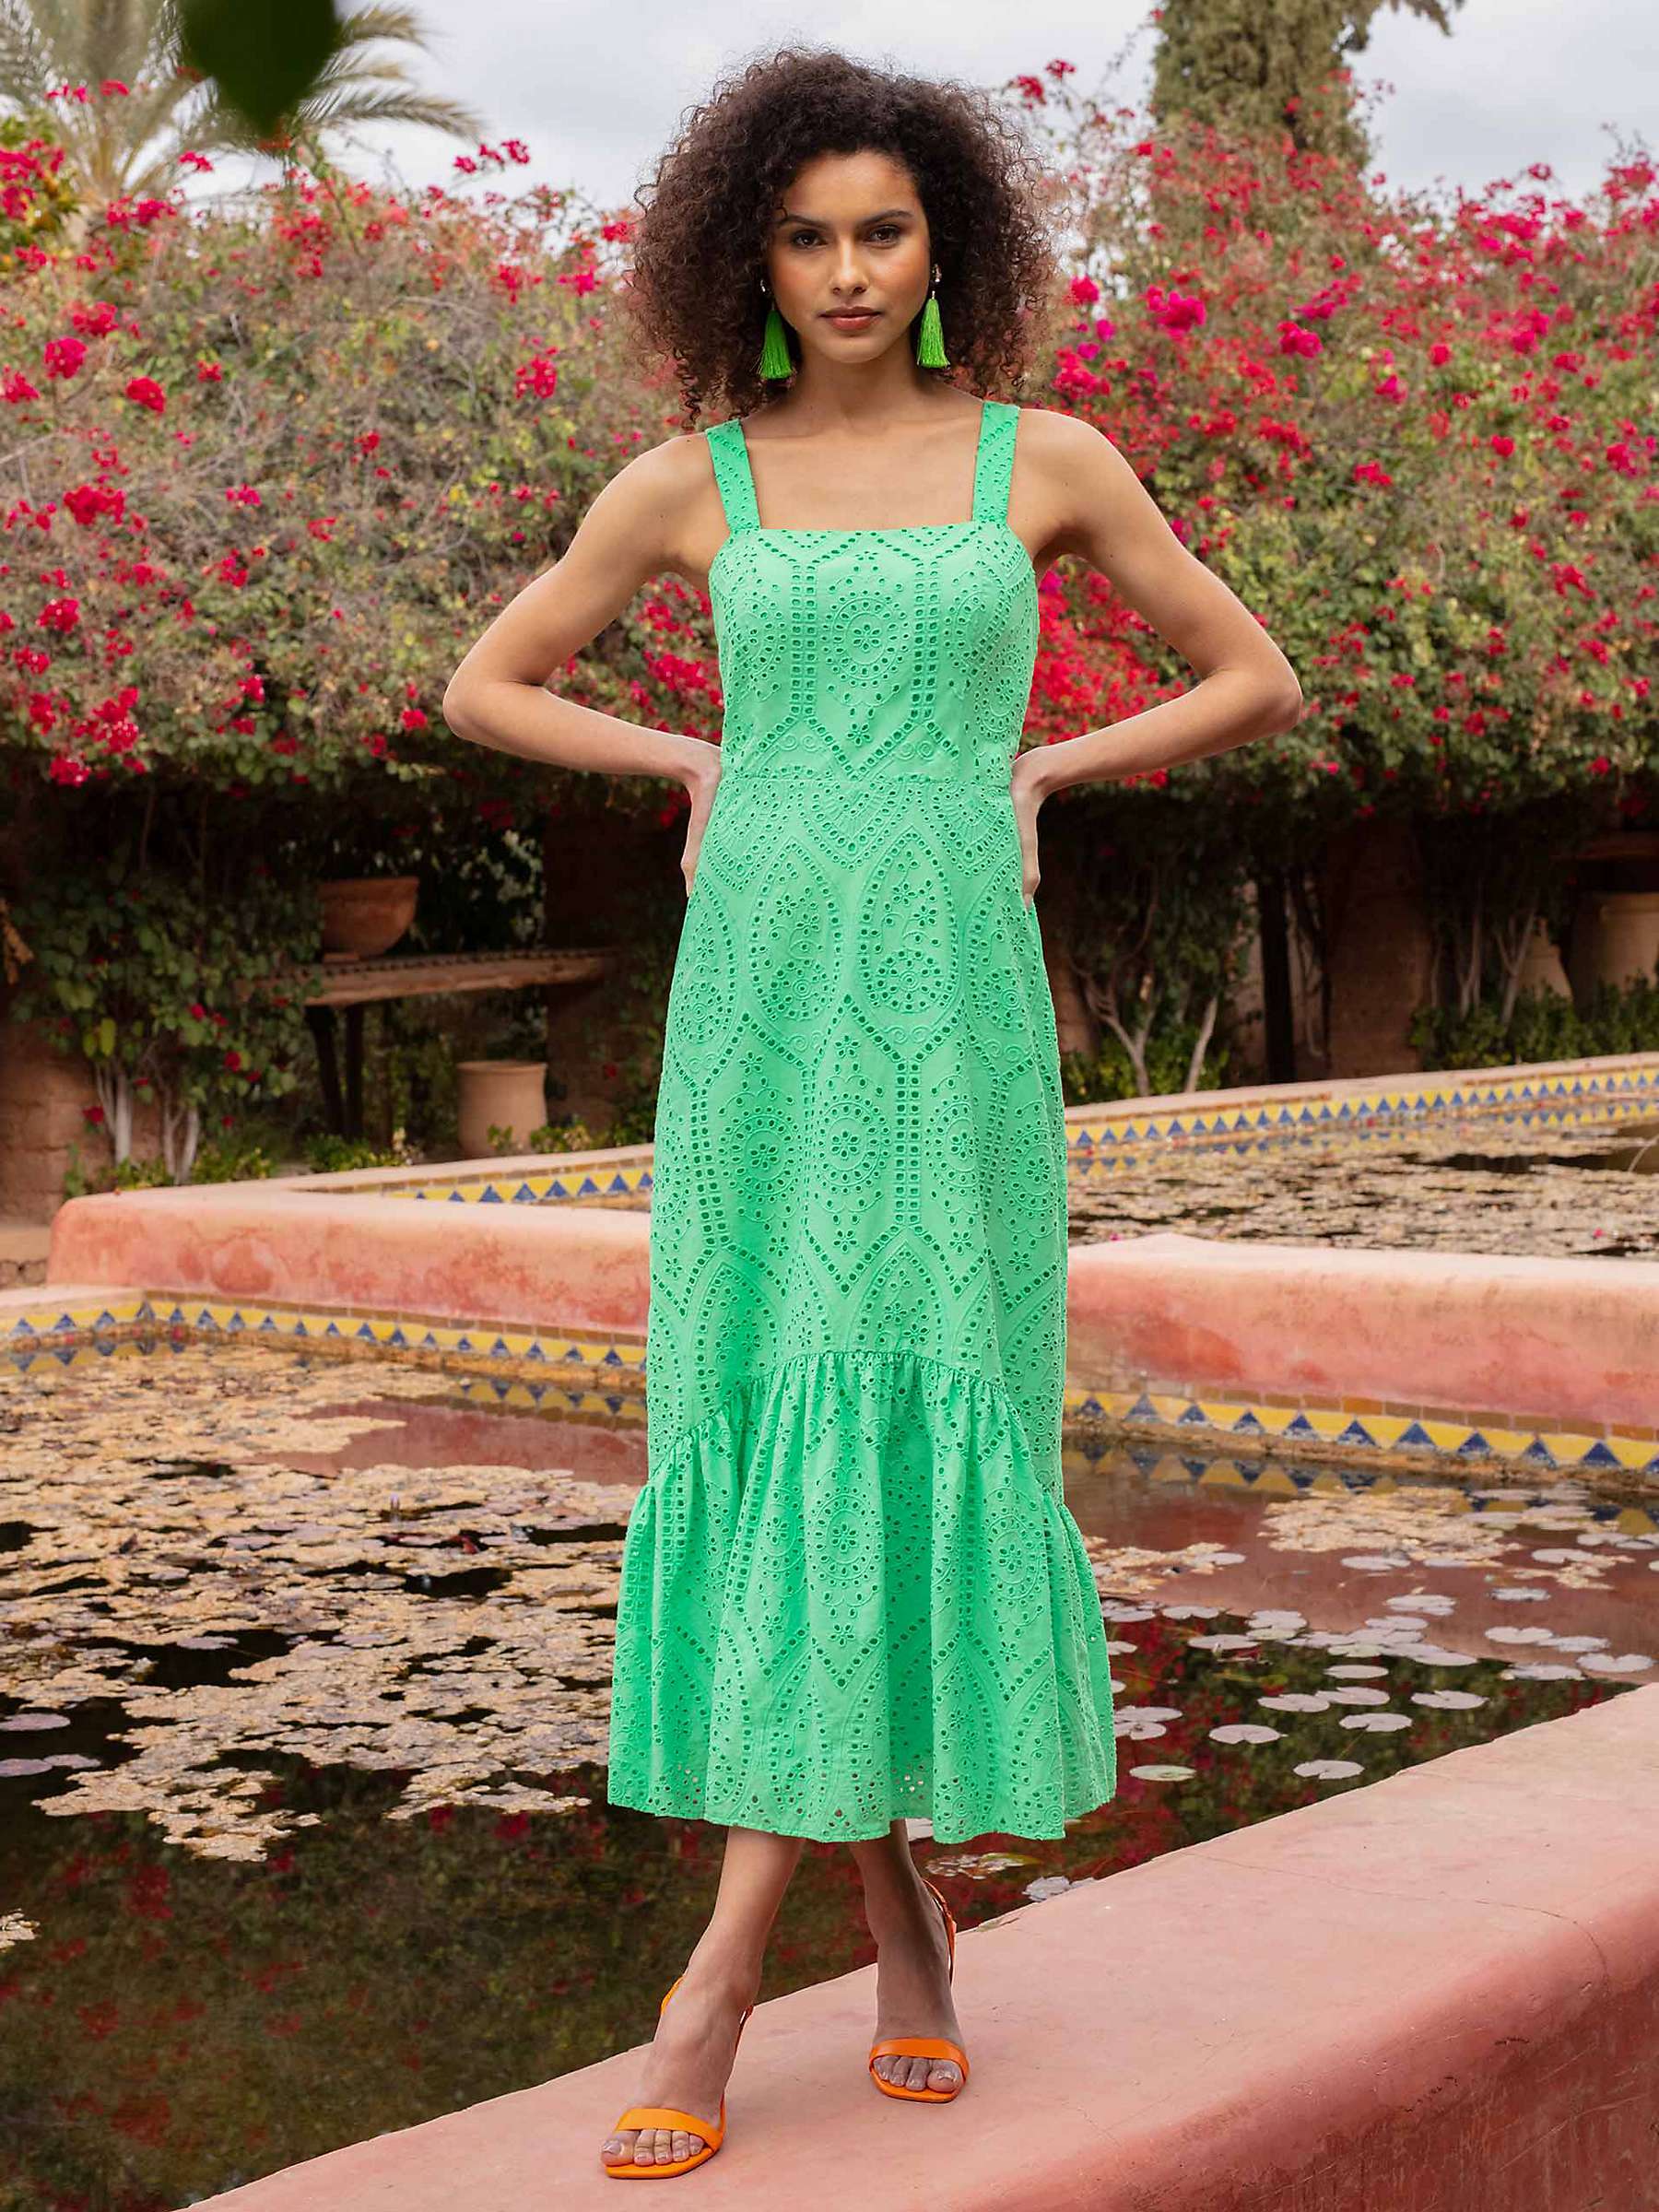 Buy Ro&Zo Strappy Broderie Anglaise Volume Hem Maxi Dress Online at johnlewis.com